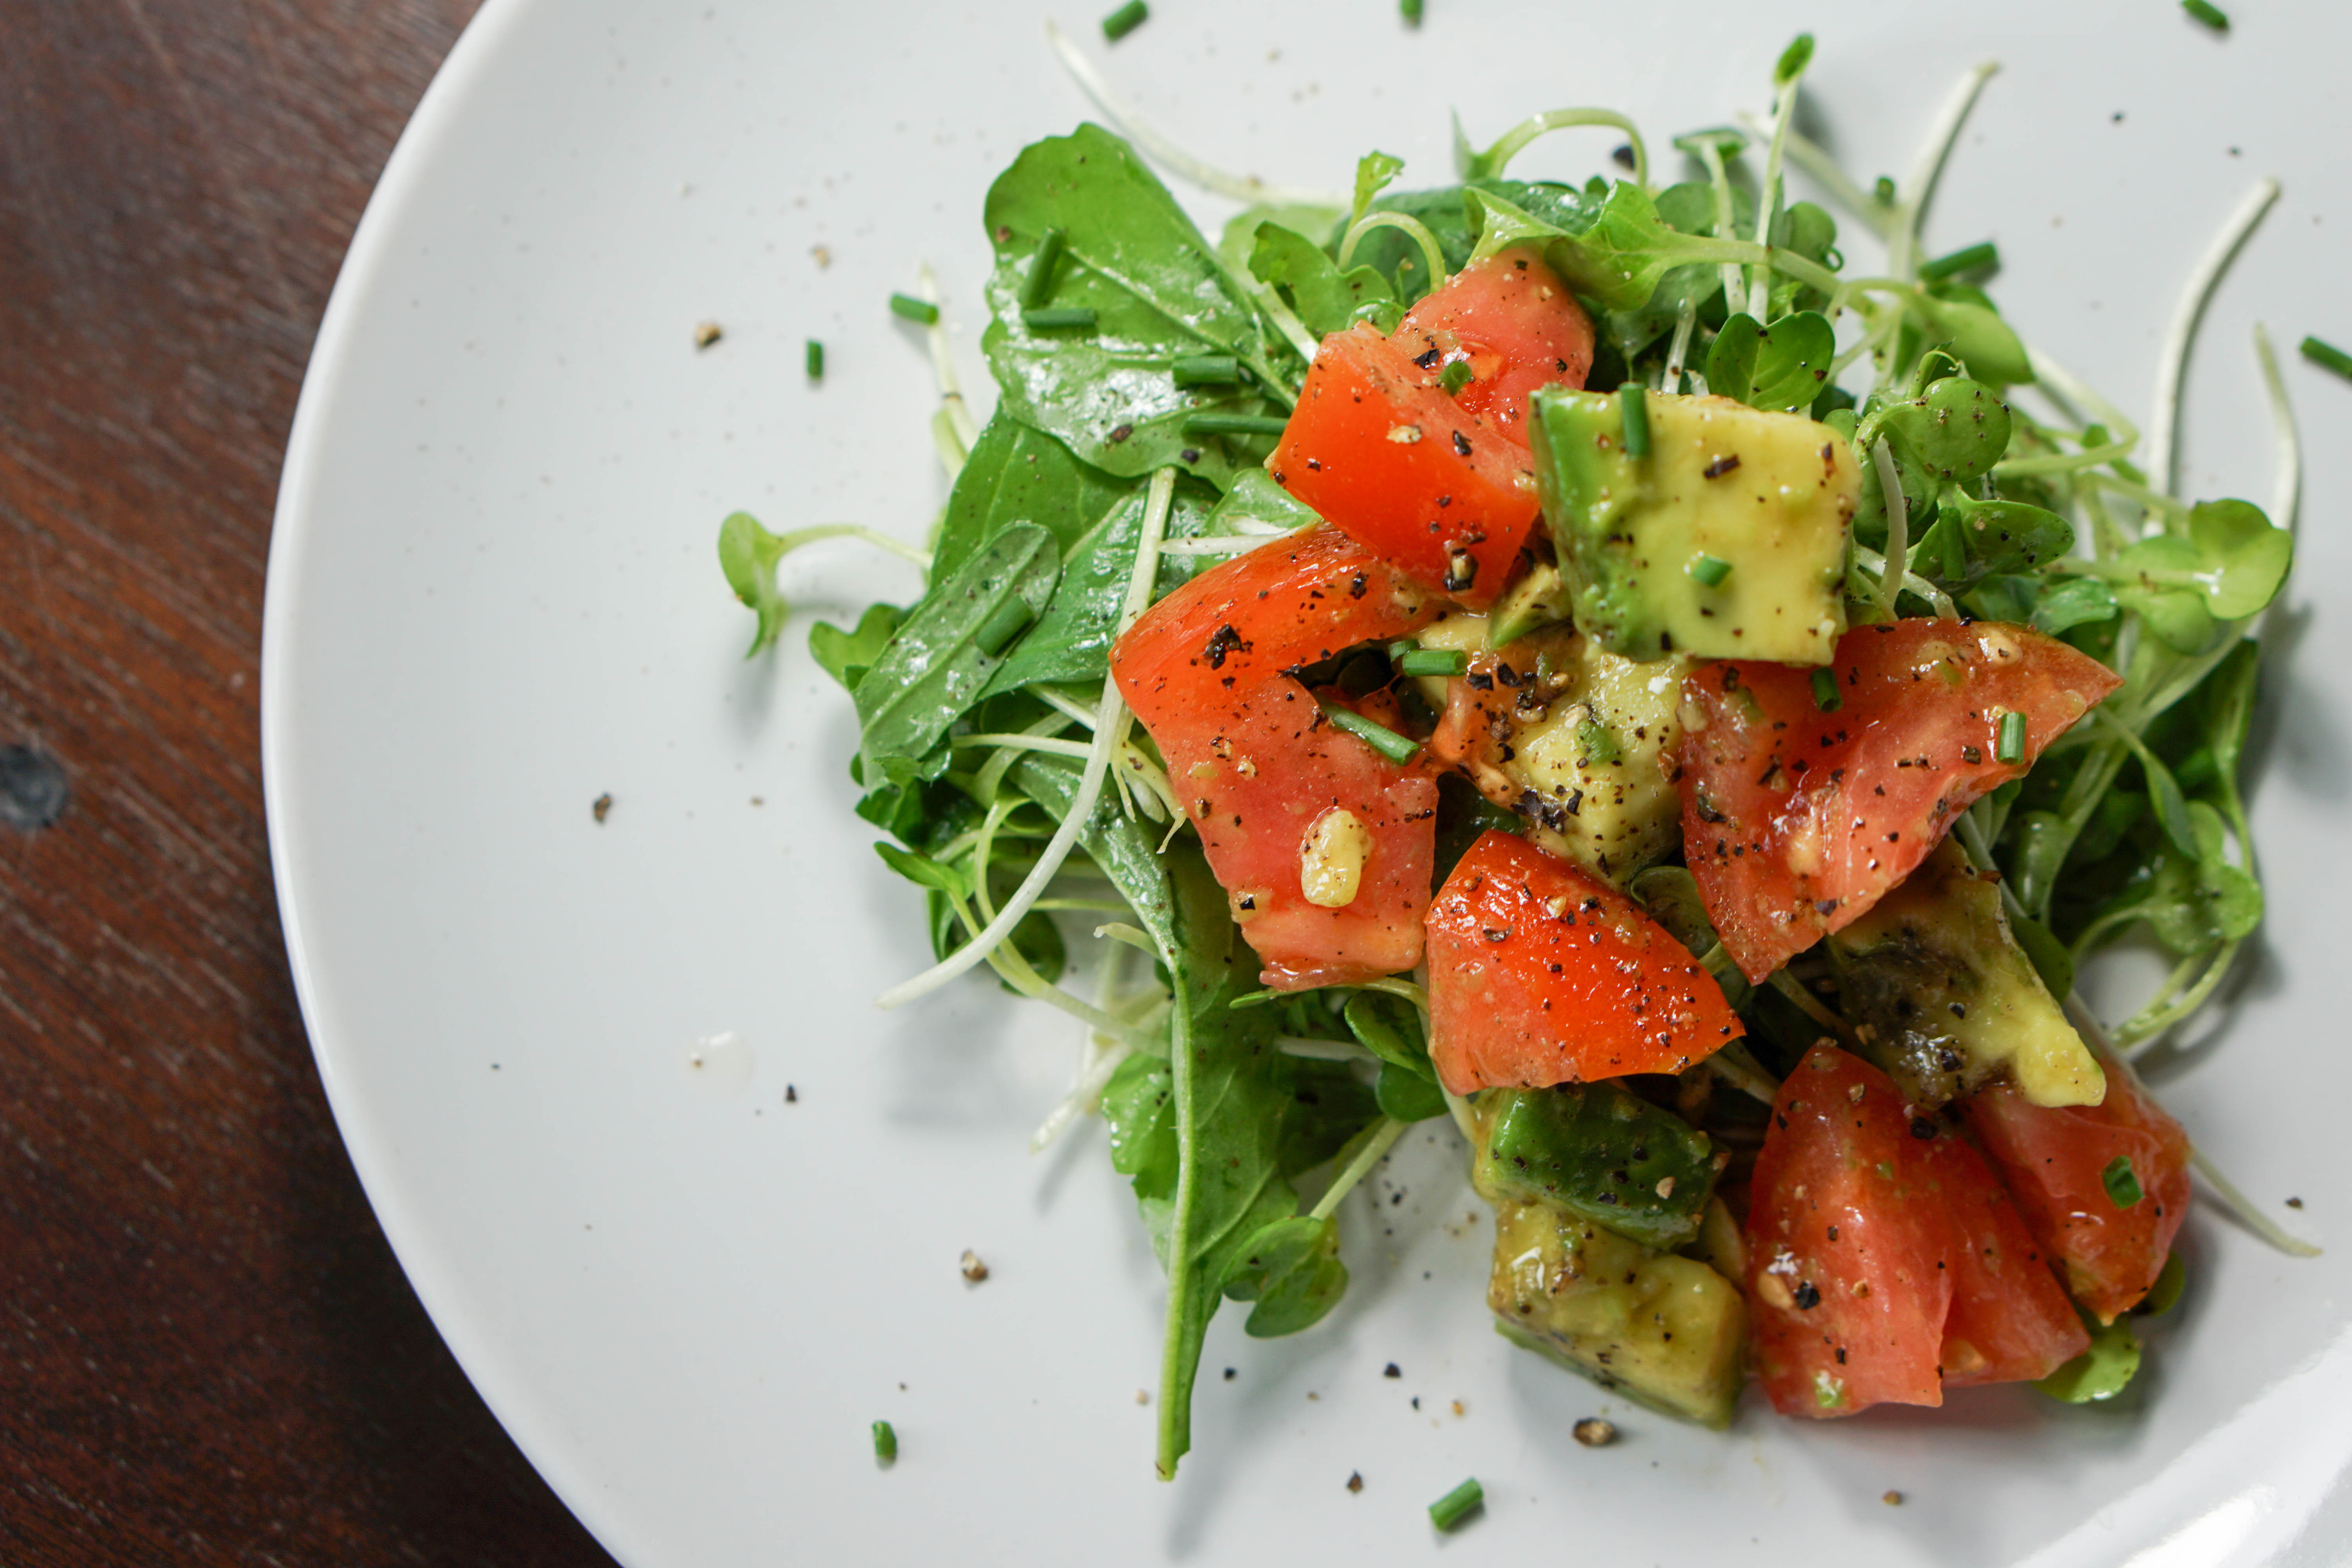 Quick, Easy and Nutritious Salad: Tomato and Avo on Arugula and Micro Greens